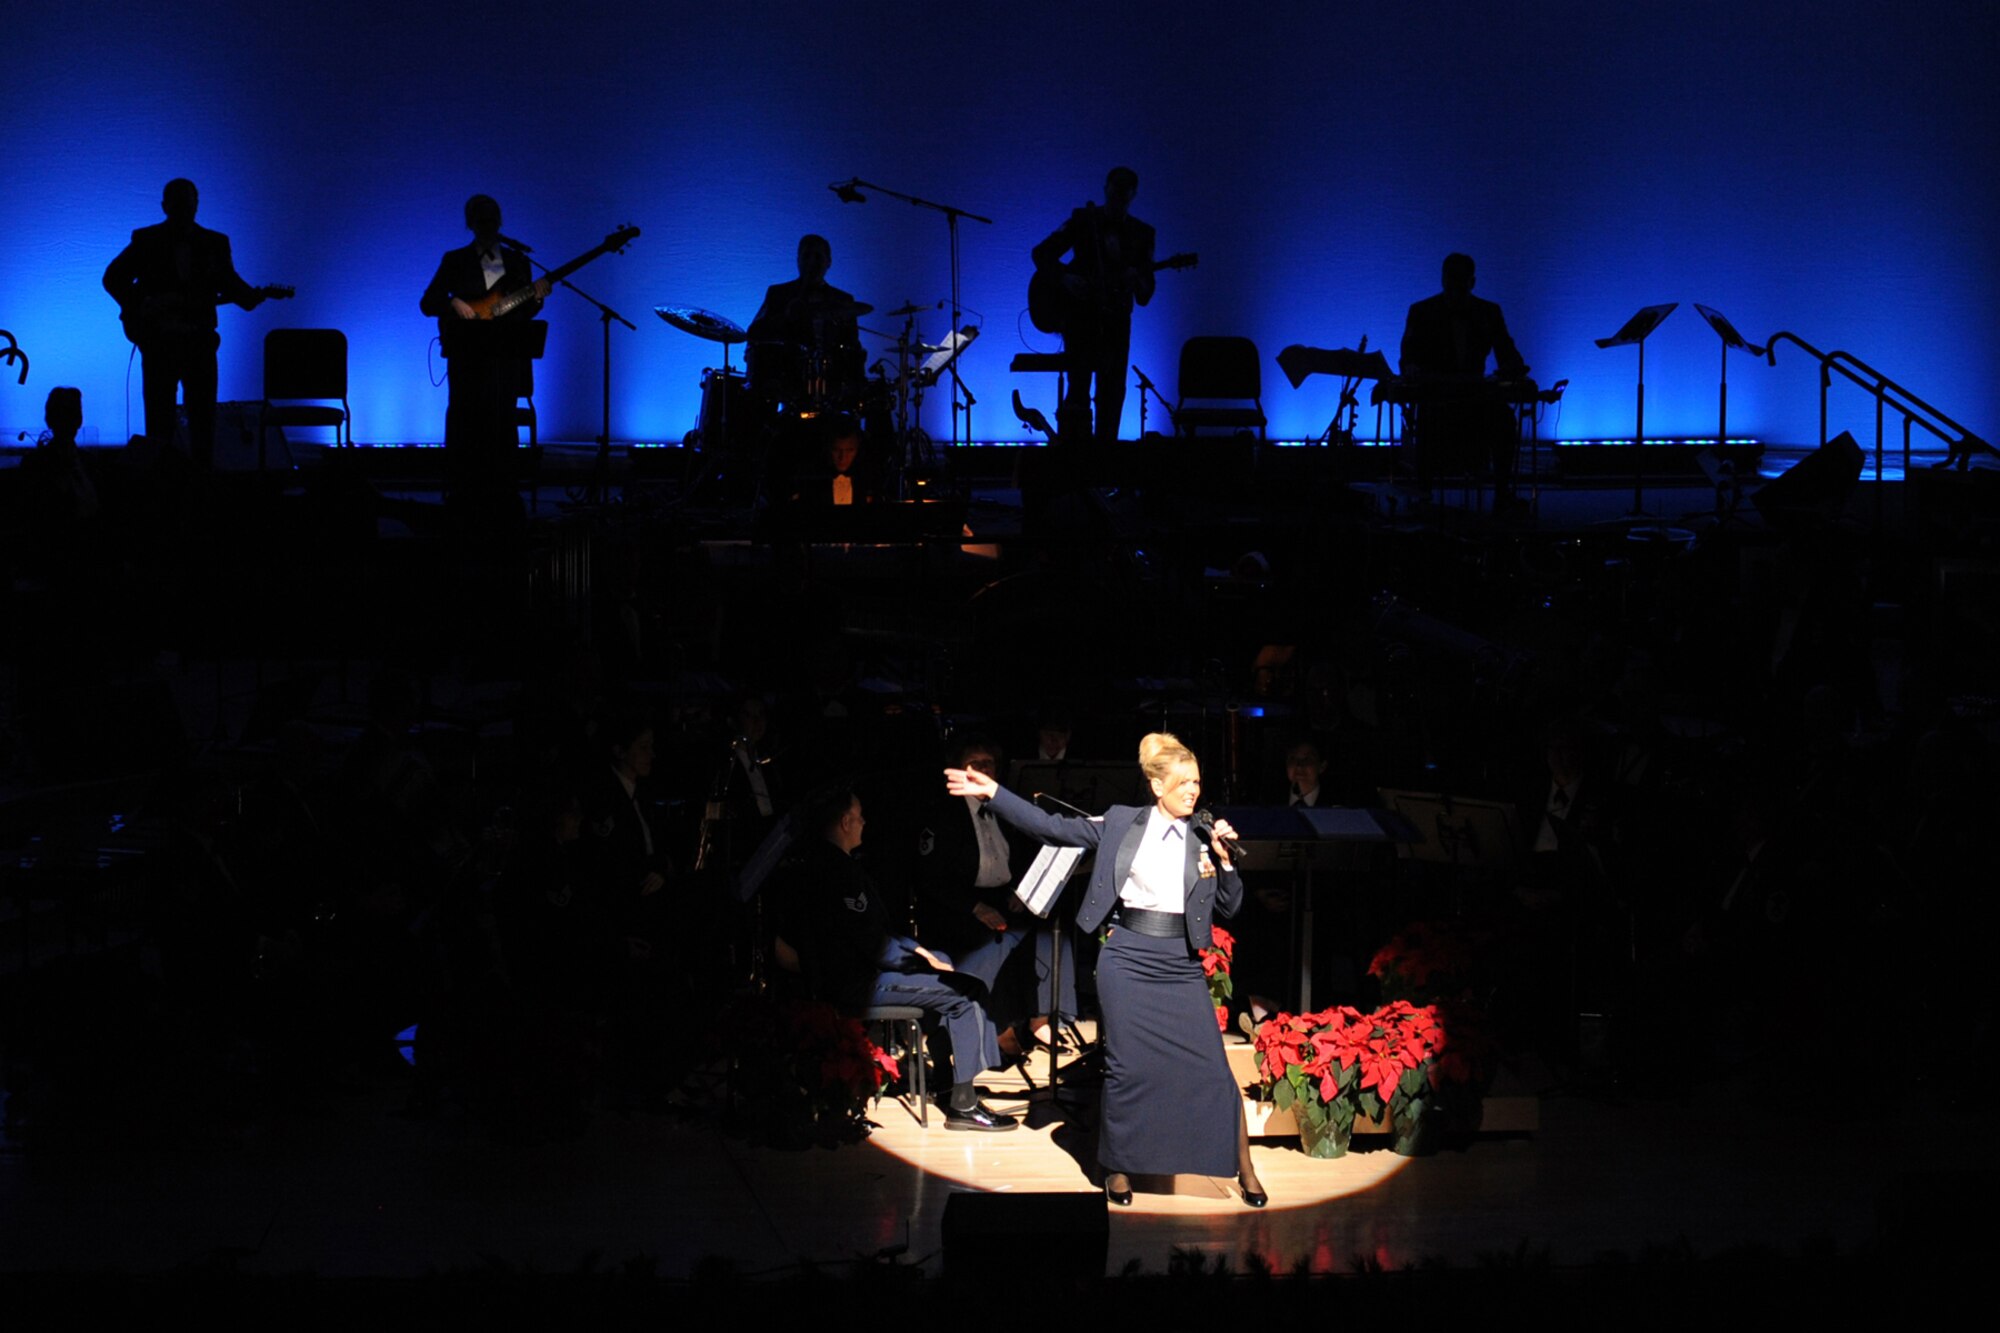 TSgt Lara Murdzia from the Heartland of America Band sings during  "The Promise of the Season" holiday concert at the Holland Performing Arts Center Dec. 11. A special concert was performed for children from area schools. (U.S. Air Force Photo By Jeff Gates)